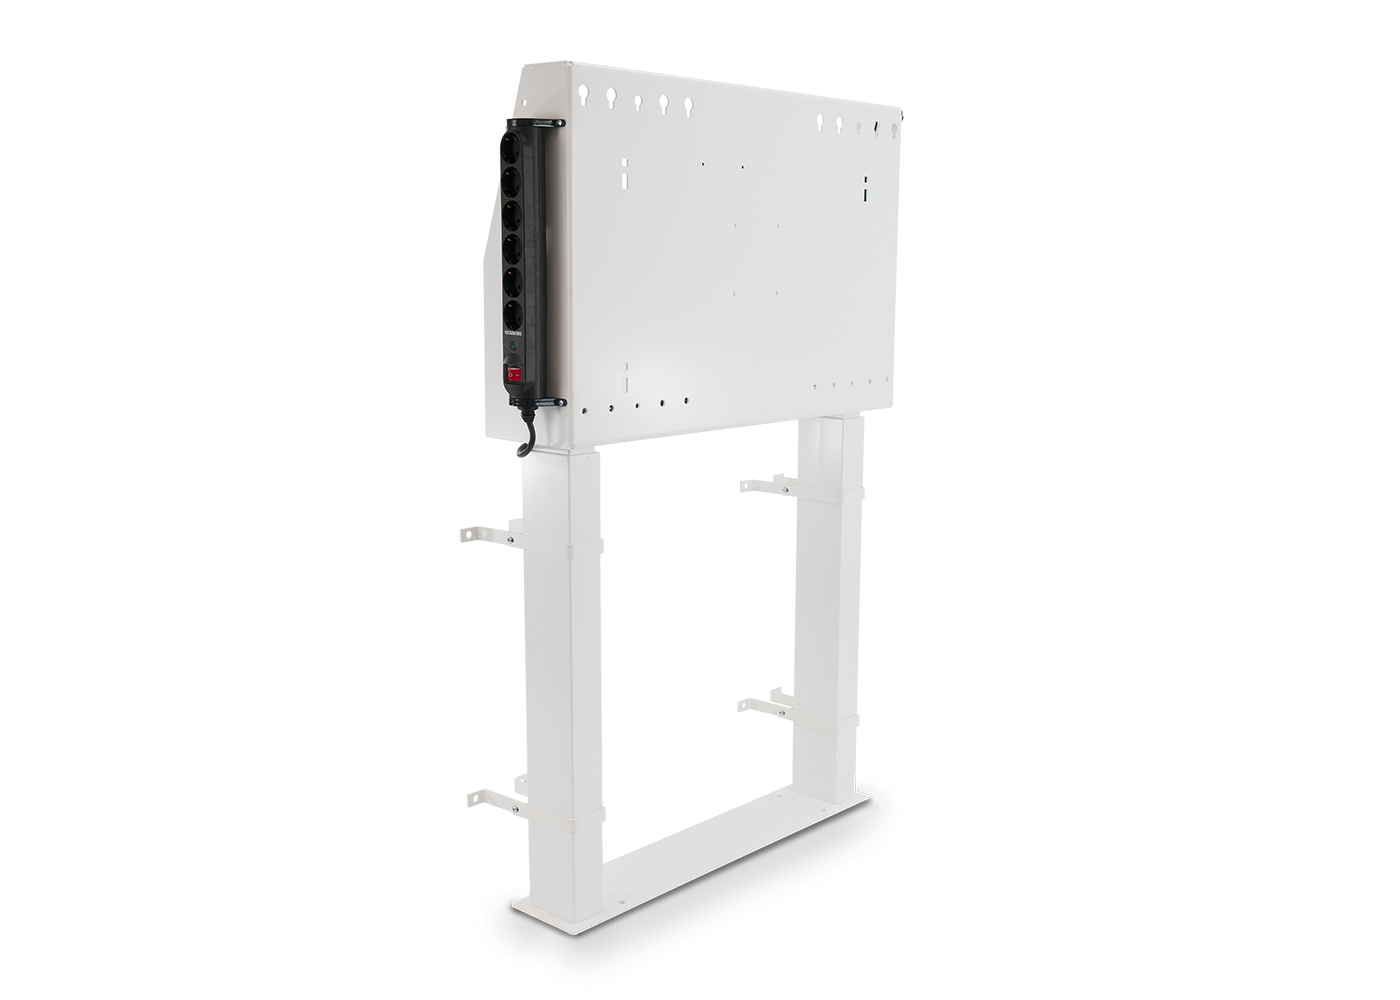 A white SMART wall stand with a height-adjustable mount and a power strip, engineered to transfer the weight of a display to the floor, which mitigates the need for wall reinforcement.